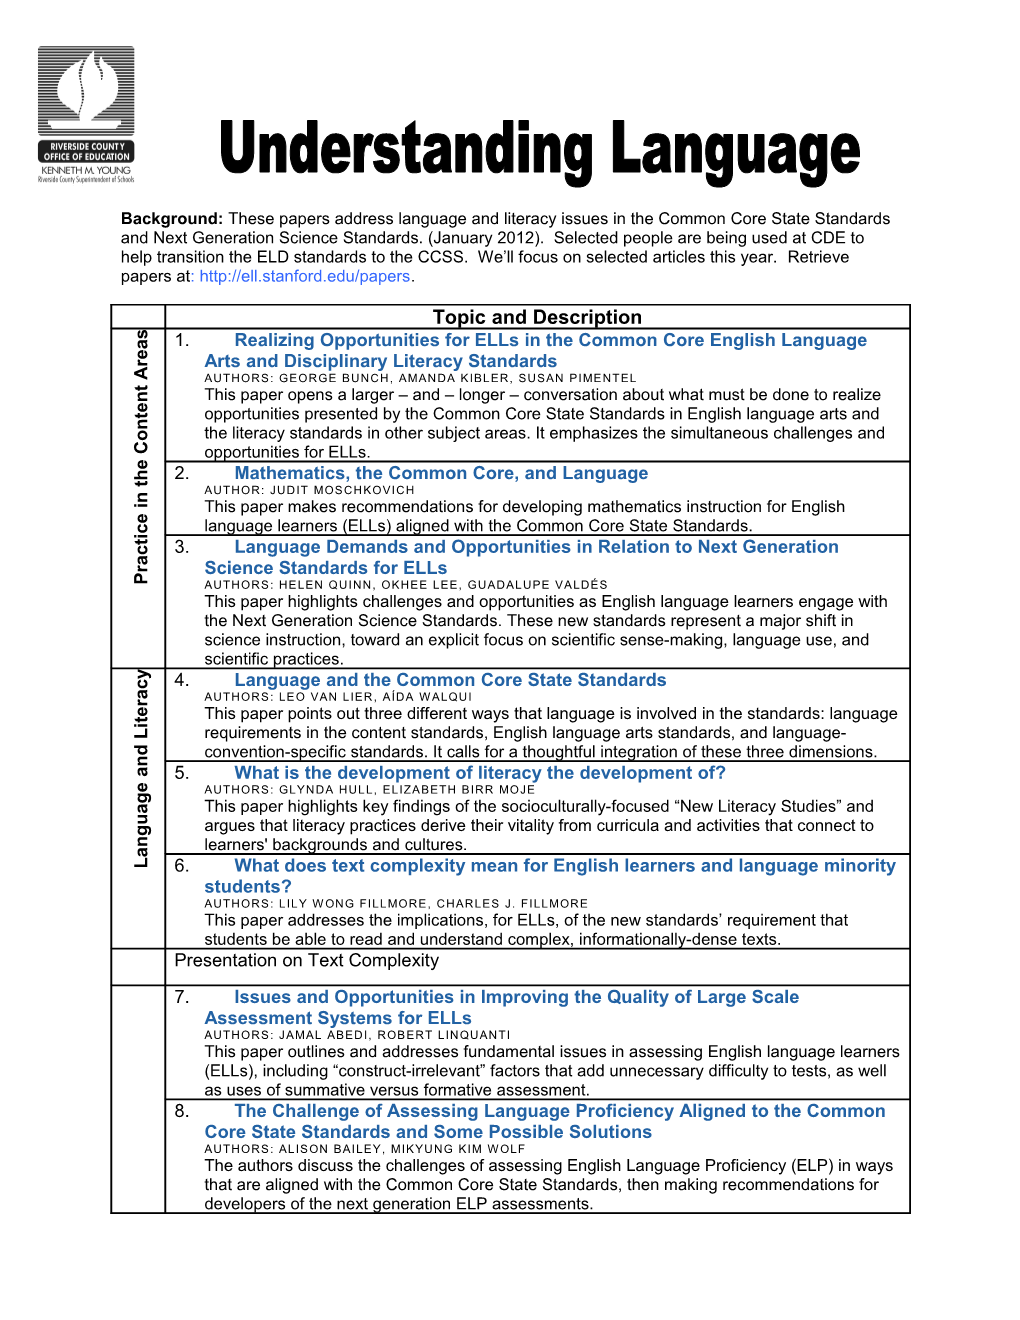 Background: These Papers Address Language and Literacy Issues in the Common Core State